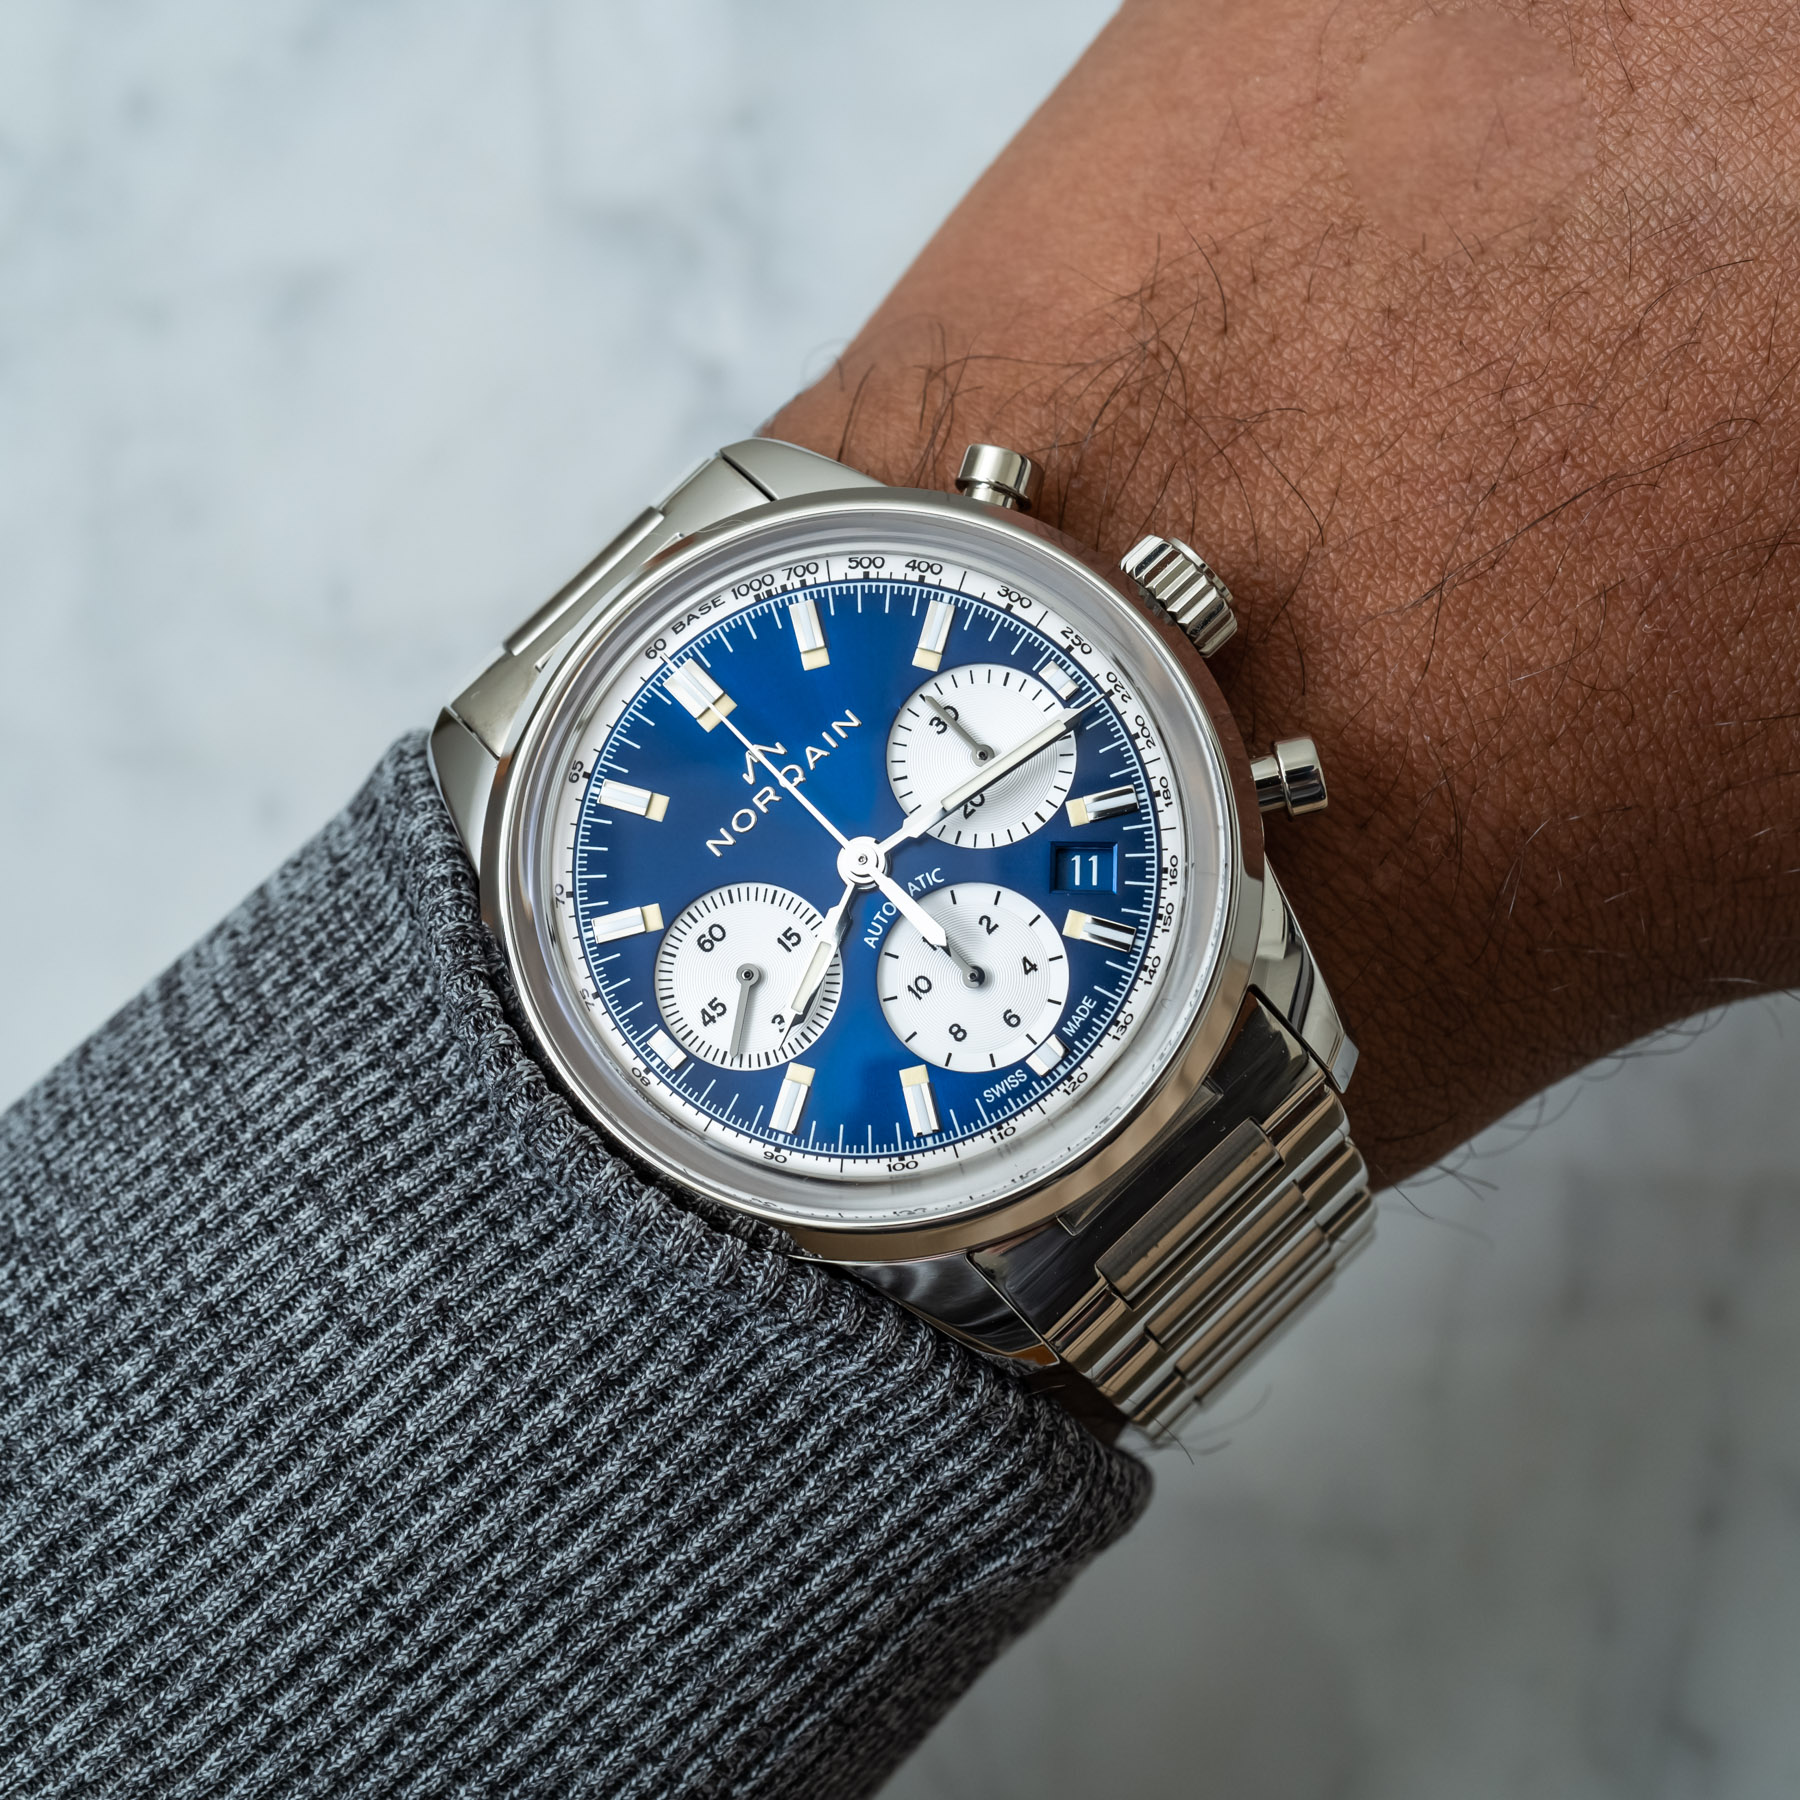 Norqain introduces ice blue dial for latest Freedom 60 chronograph